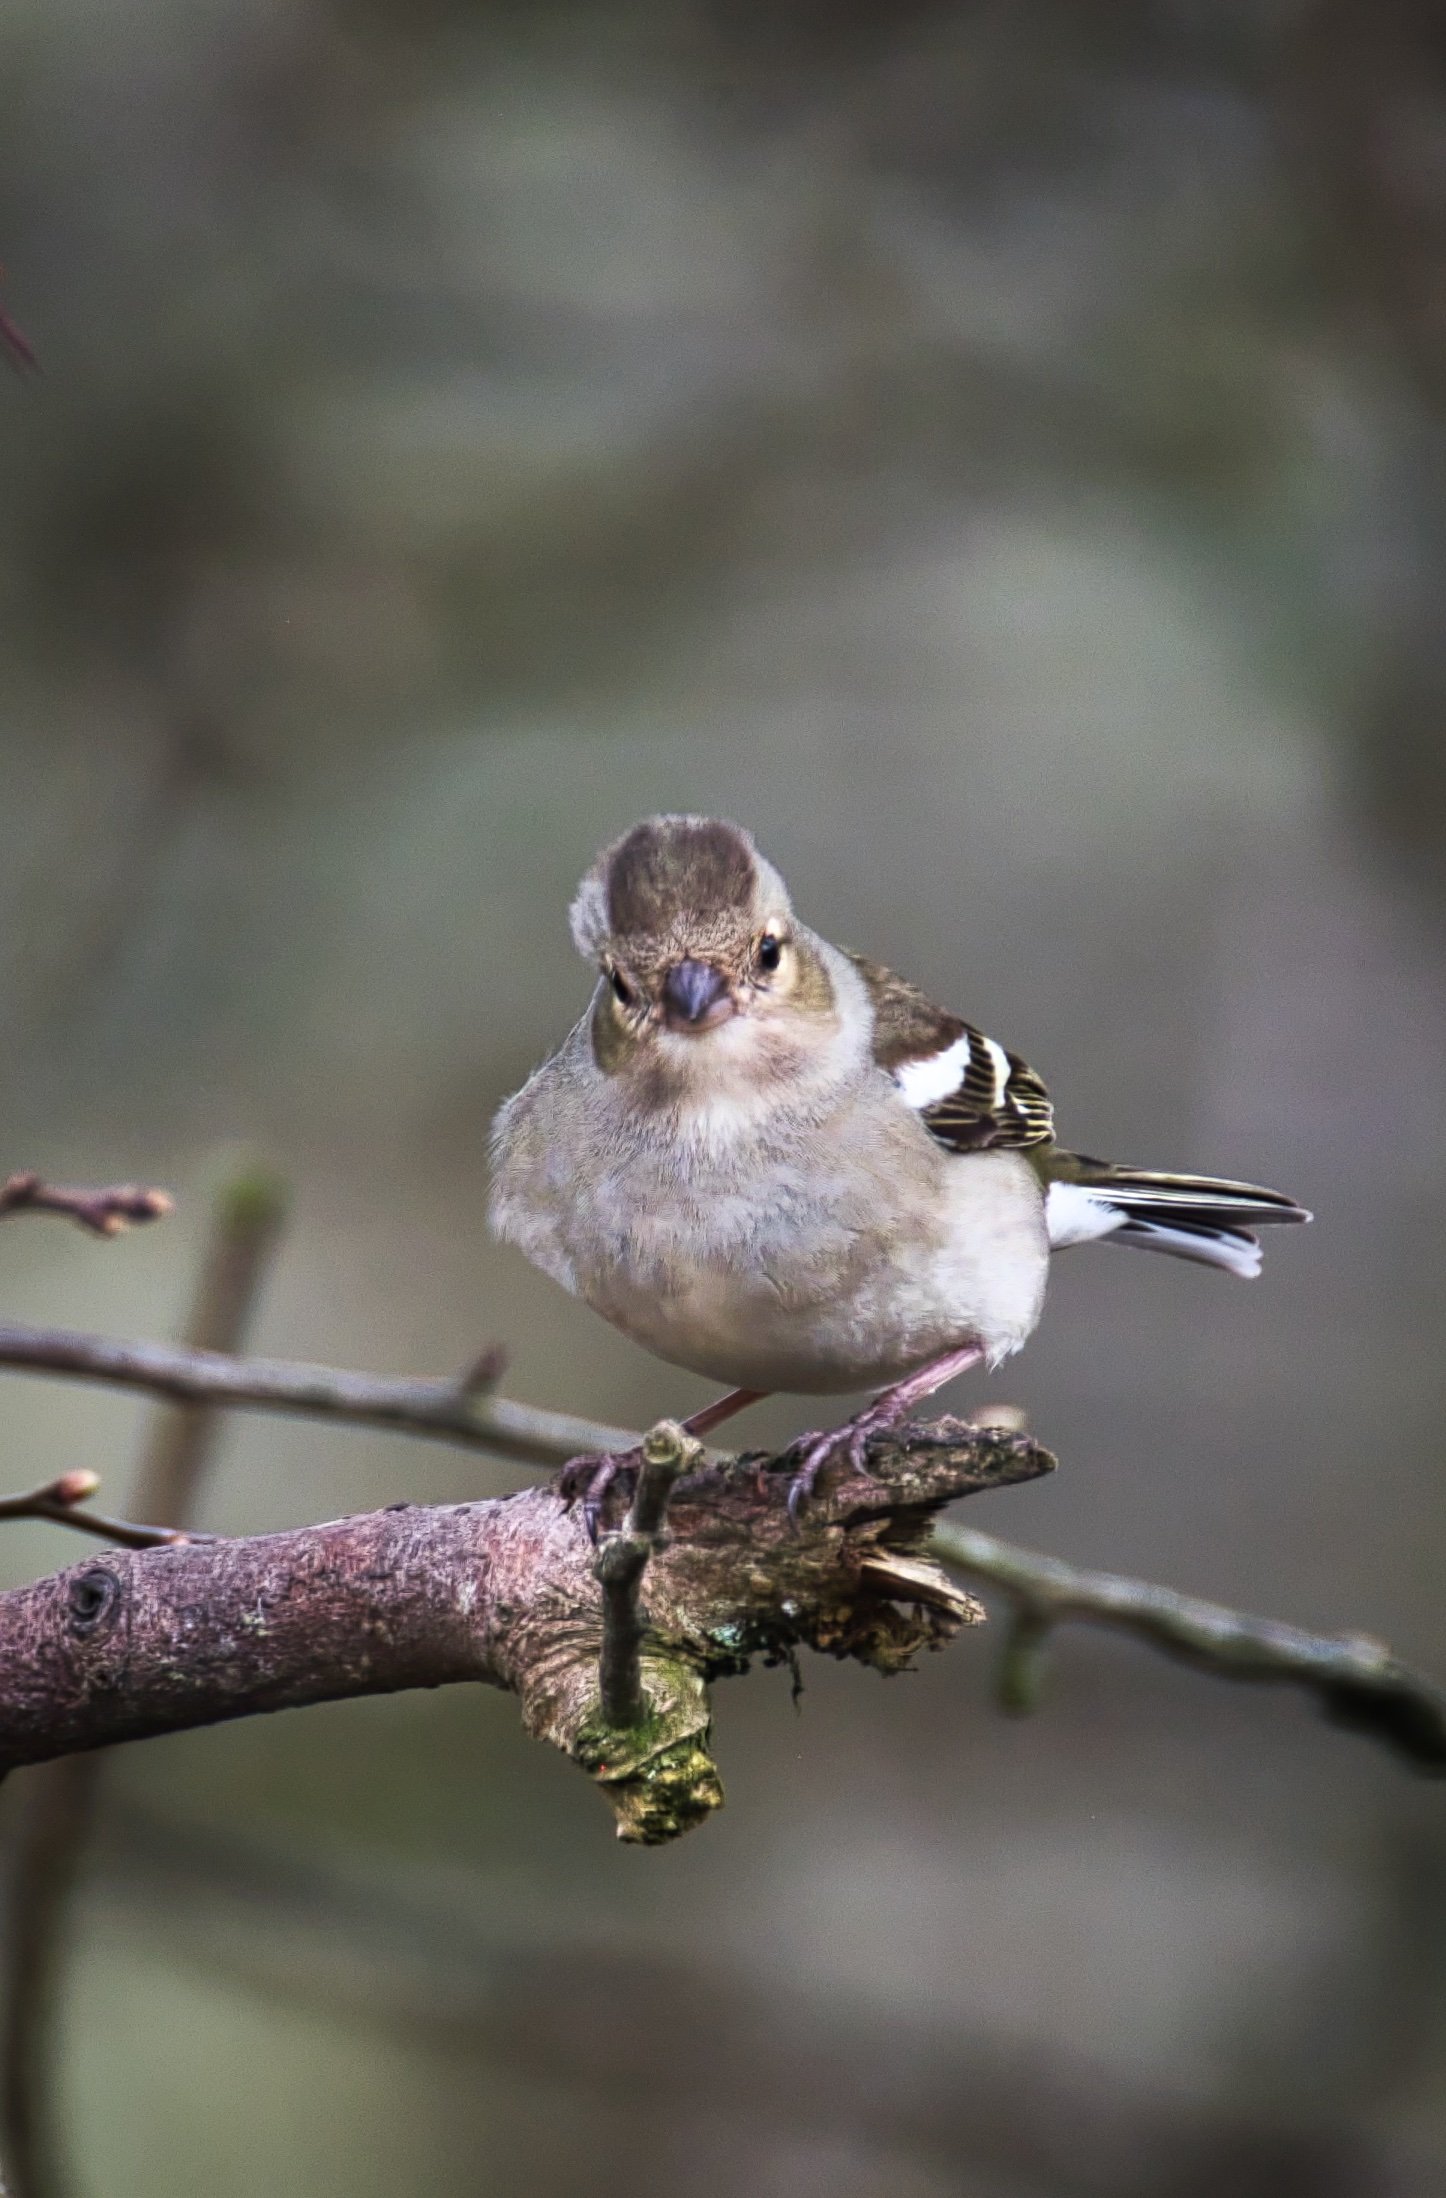 The easily overlooked but photogenic female Chaffinch